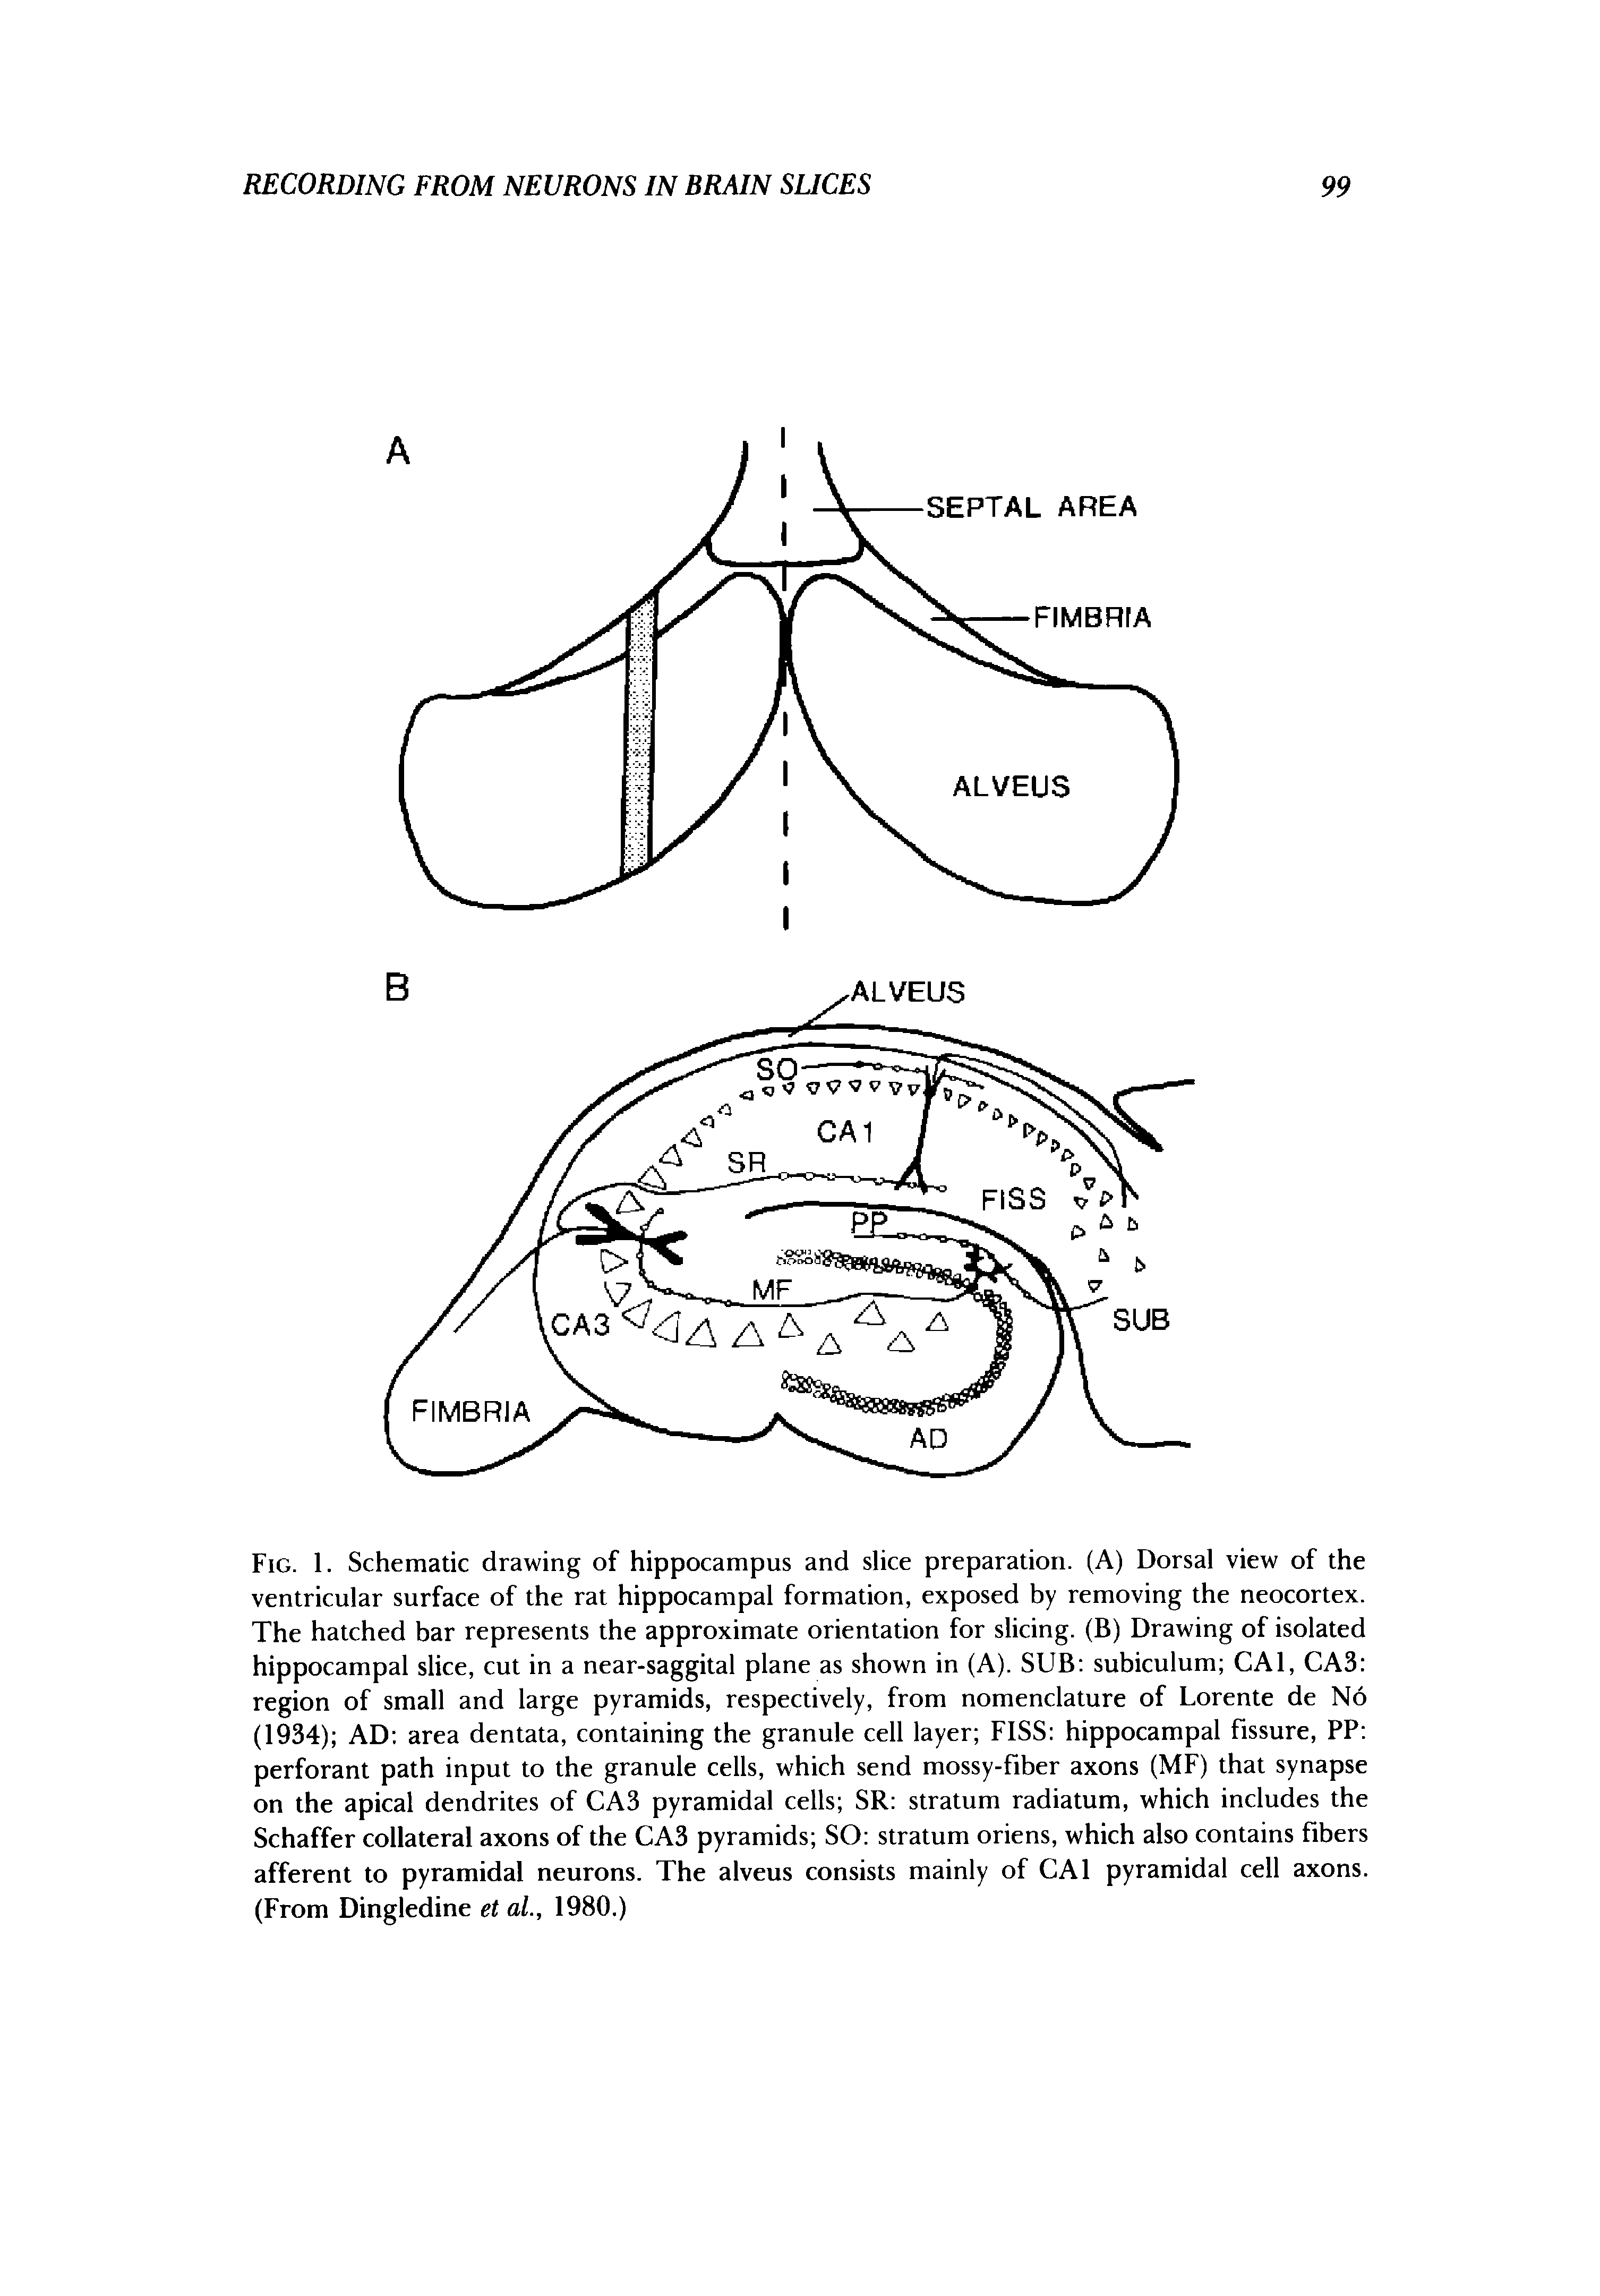 Fig. 1. Schematic drawing of hippocampus and slice preparation. (A) Dorsal view of the ventricular surface of the rat hippocampal formation, exposed by removing the neocortex. The hatched bar represents the approximate orientation for slicing. (B) Drawing of isolated hippocampal slice, cut in a near-saggital plane as shown in (A). SUB subiculum CAl, CAS region of small and large pyramids, respectively, from nomenclature of Lorente de No (1934) AD area dentata, containing the granule cell layer FISS hippocampal fissure, PP perforant path input to the granule cells, which send mossy-fiber axons (MF) that synapse on the apical dendrites of CAS pyramidal cells SR stratum radiatum, which includes the Schaffer collateral axons of the CAS pyramids SO stratum oriens, which also contains fibers afferent to pyramidal neurons. The alveus consists mainly of CAl pyramidal cell axons. (From Dingledine et al, 1980.)...